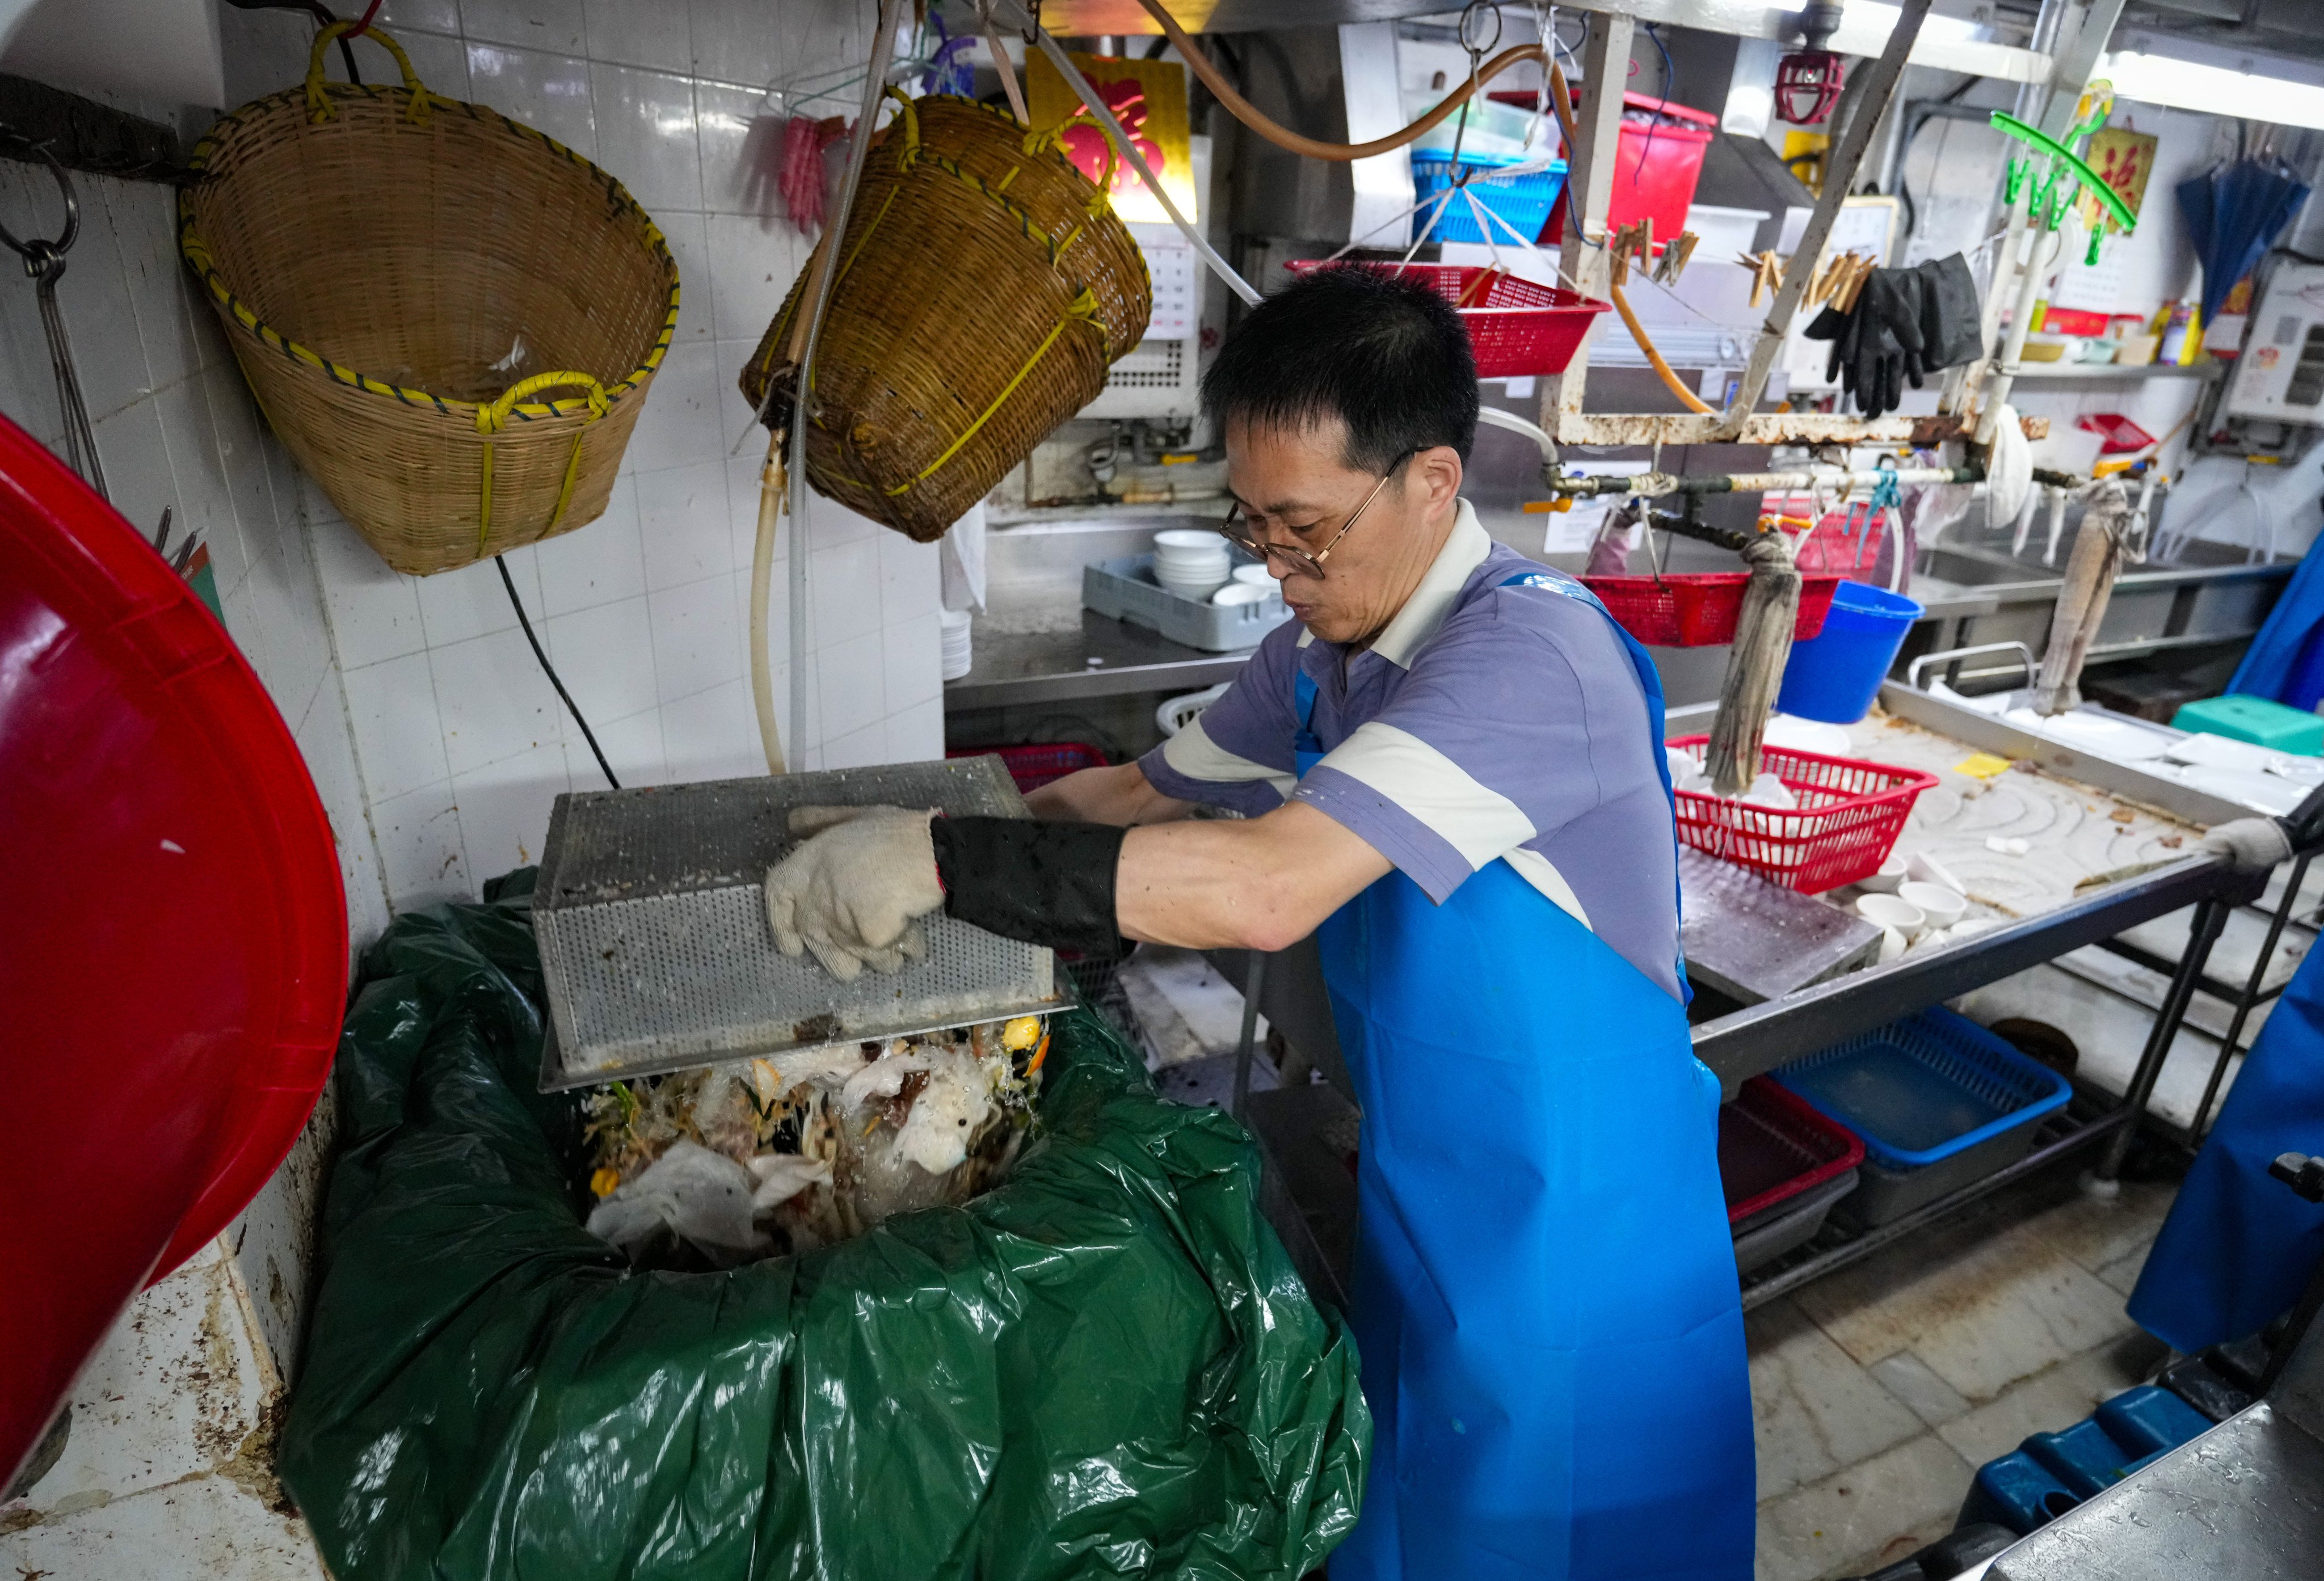 A worker at a restaurant taking part in a trial run of the waste-charging scheme. Authorities are expected to brief legislators on the results later this month. Photo: Sam Tsang